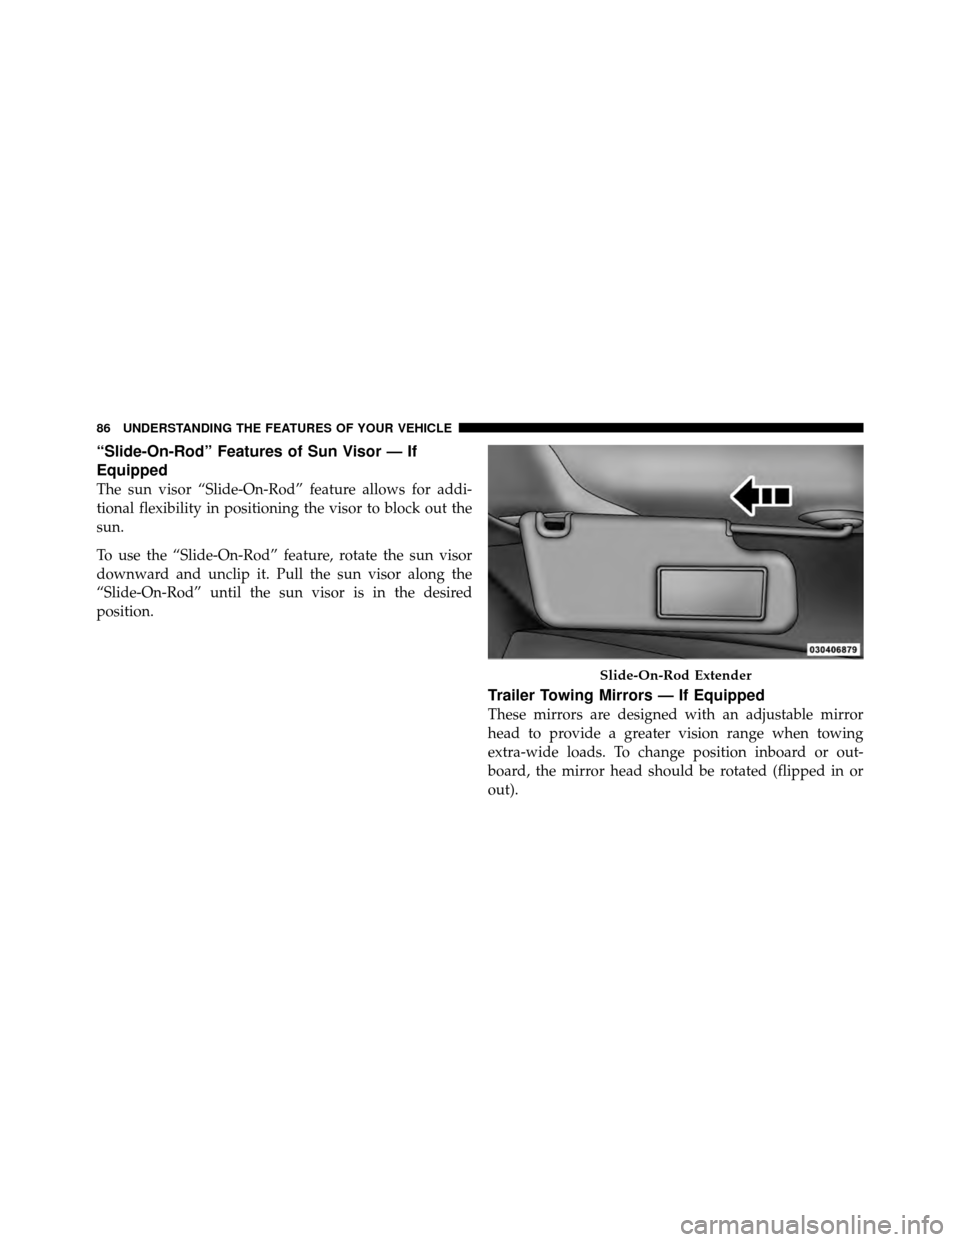 Ram 5500 Chassis Cab 2011  Owners Manual “Slide-On-Rod” Features of Sun Visor — If
Equipped
The sun visor “Slide-On-Rod” feature allows for addi-
tional flexibility in positioning the visor to block out the
sun.
To use the “Slide